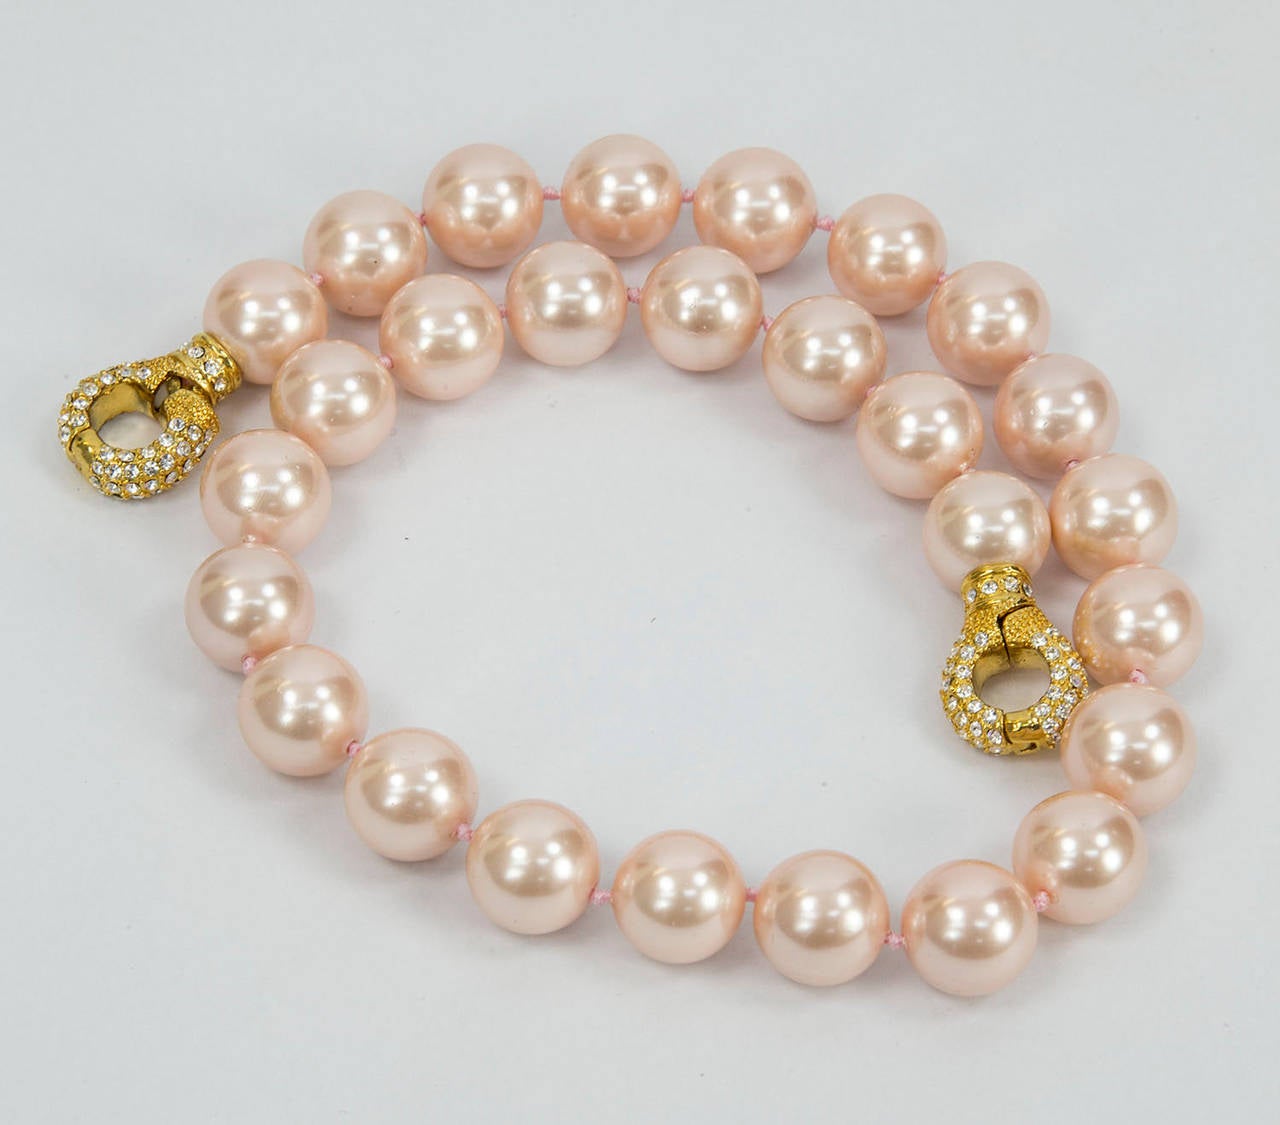 Striking lustrous 14mm Pink Faux Pearl Necklace; hand knotted with matching color silk thread; held by a CZ encrusted interlocking magnetic clasp. Measuring approx .18” long. Go anywhere in style with this Chic and Timeless strand of Pearls! 